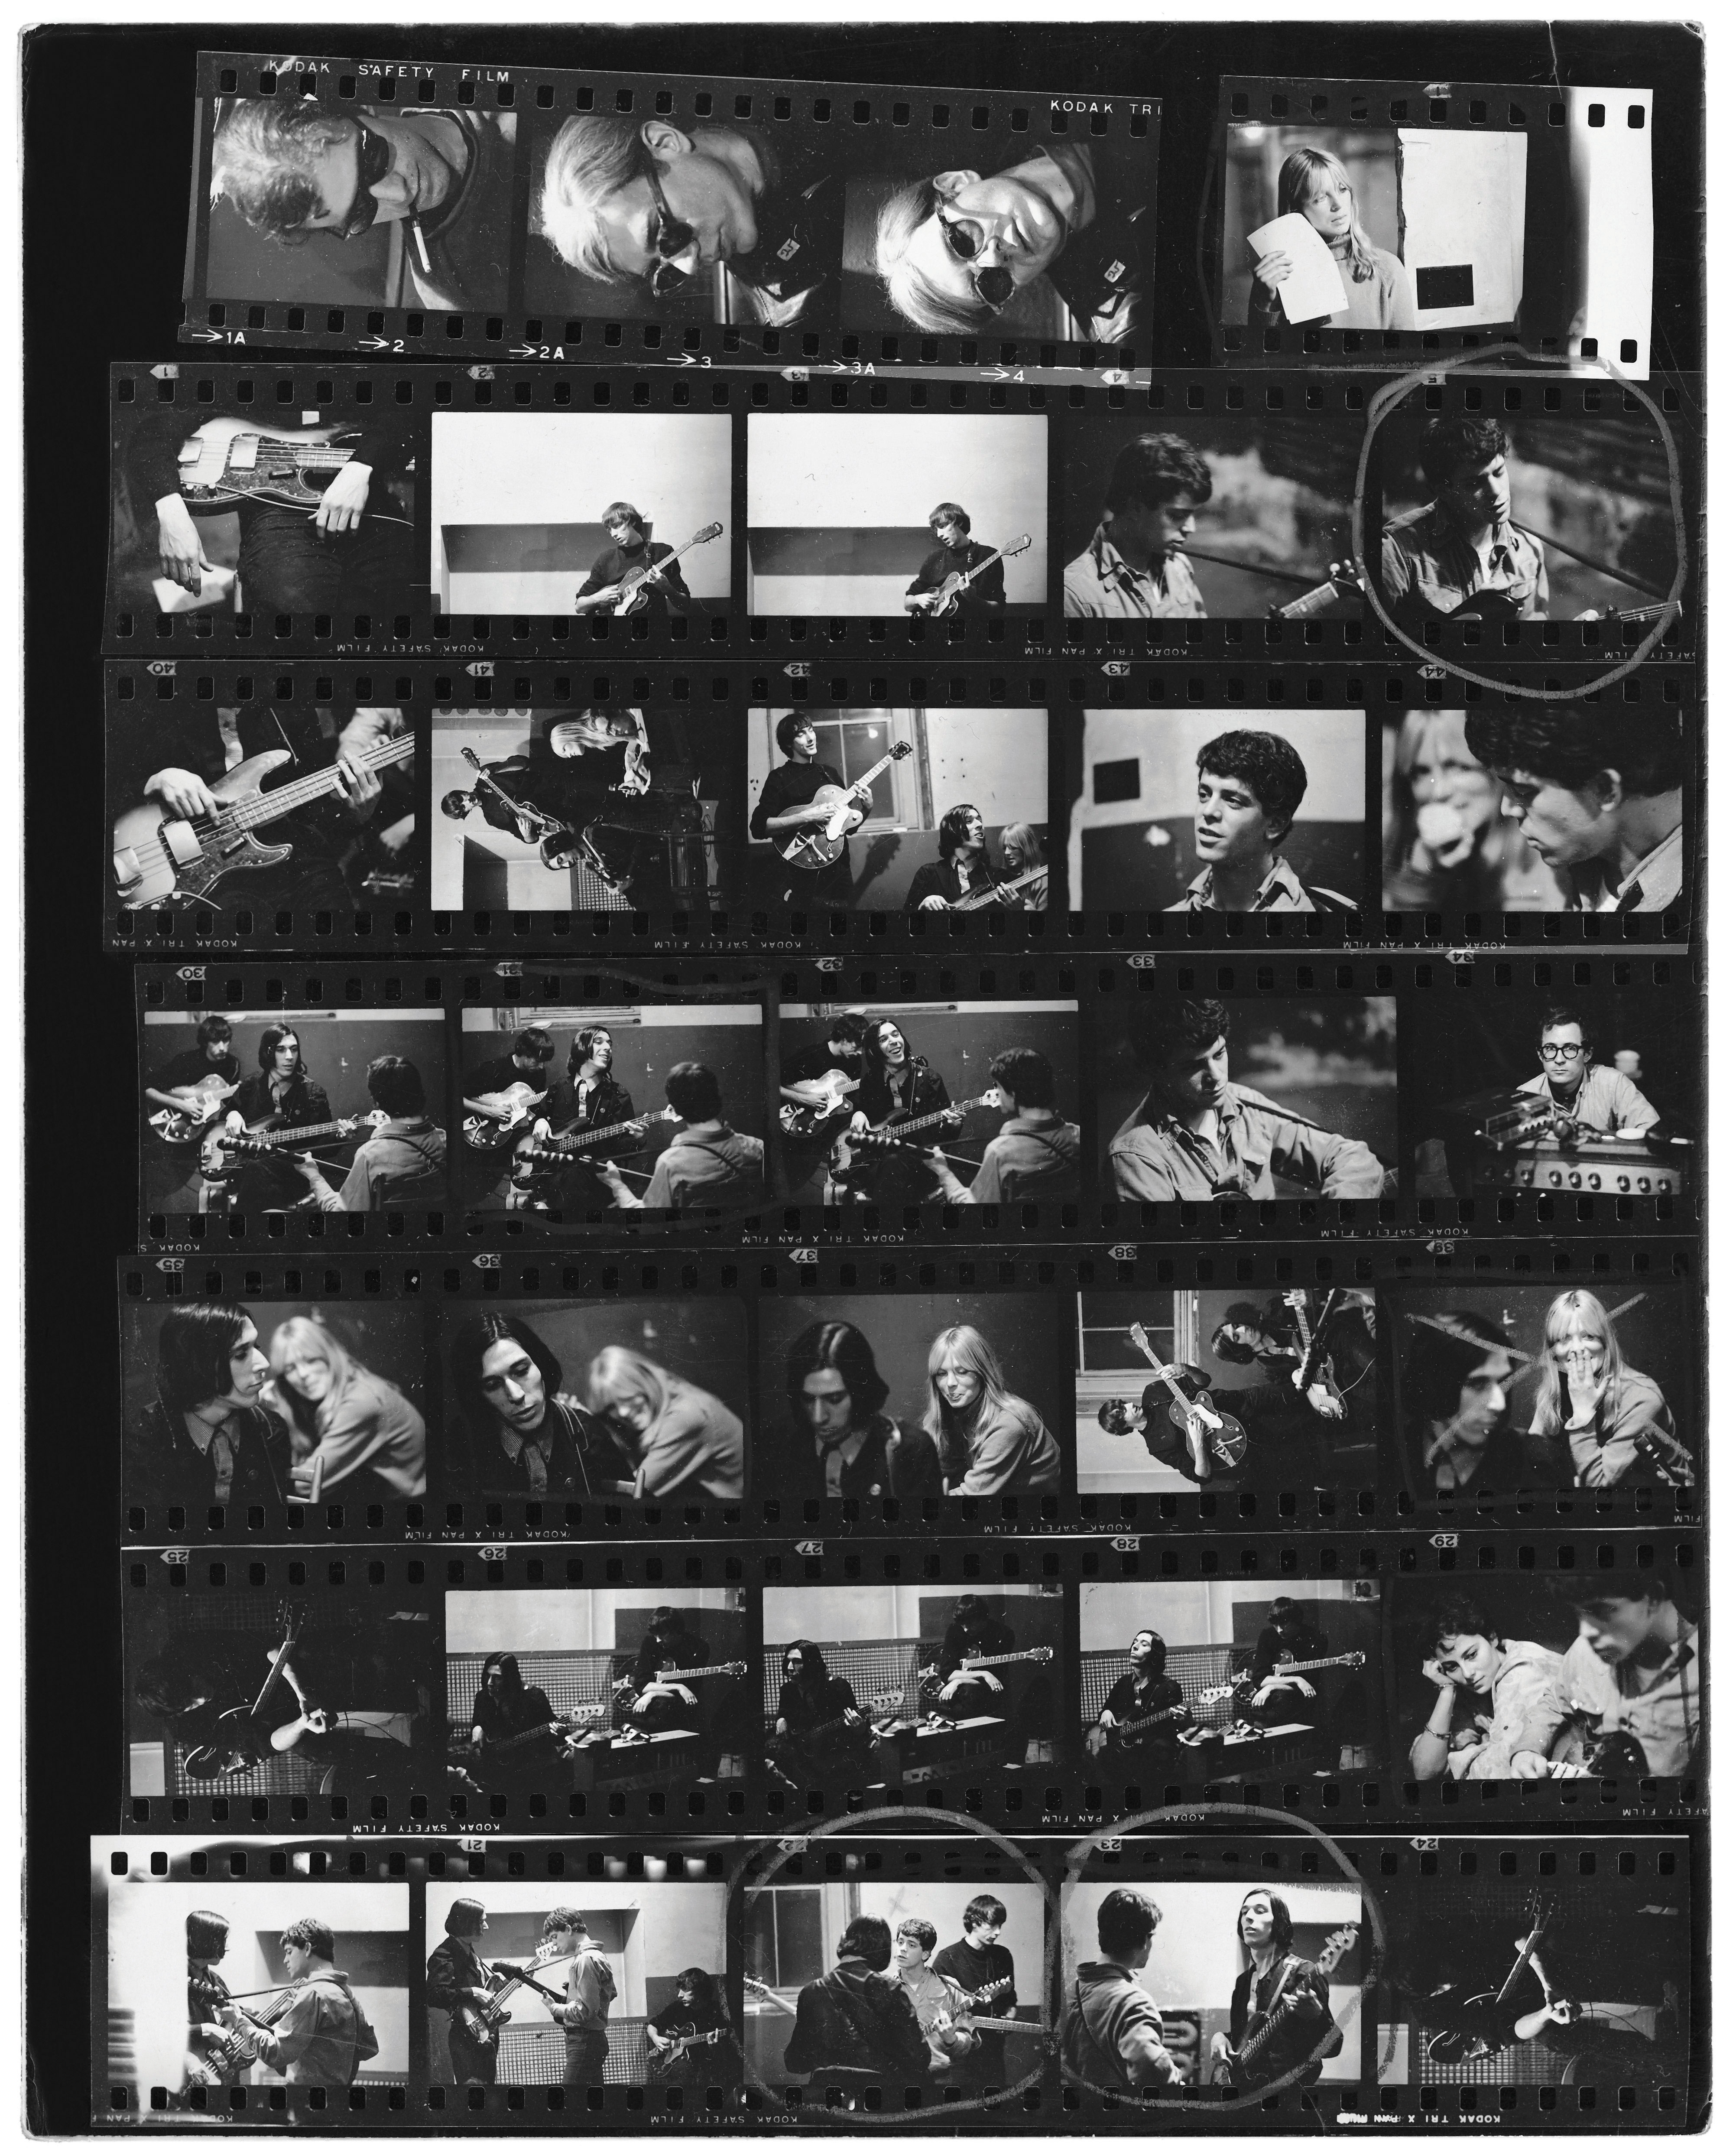 Contact sheet of images of the Velvet Underground. From Factory Andy Warhol Stephen Shore